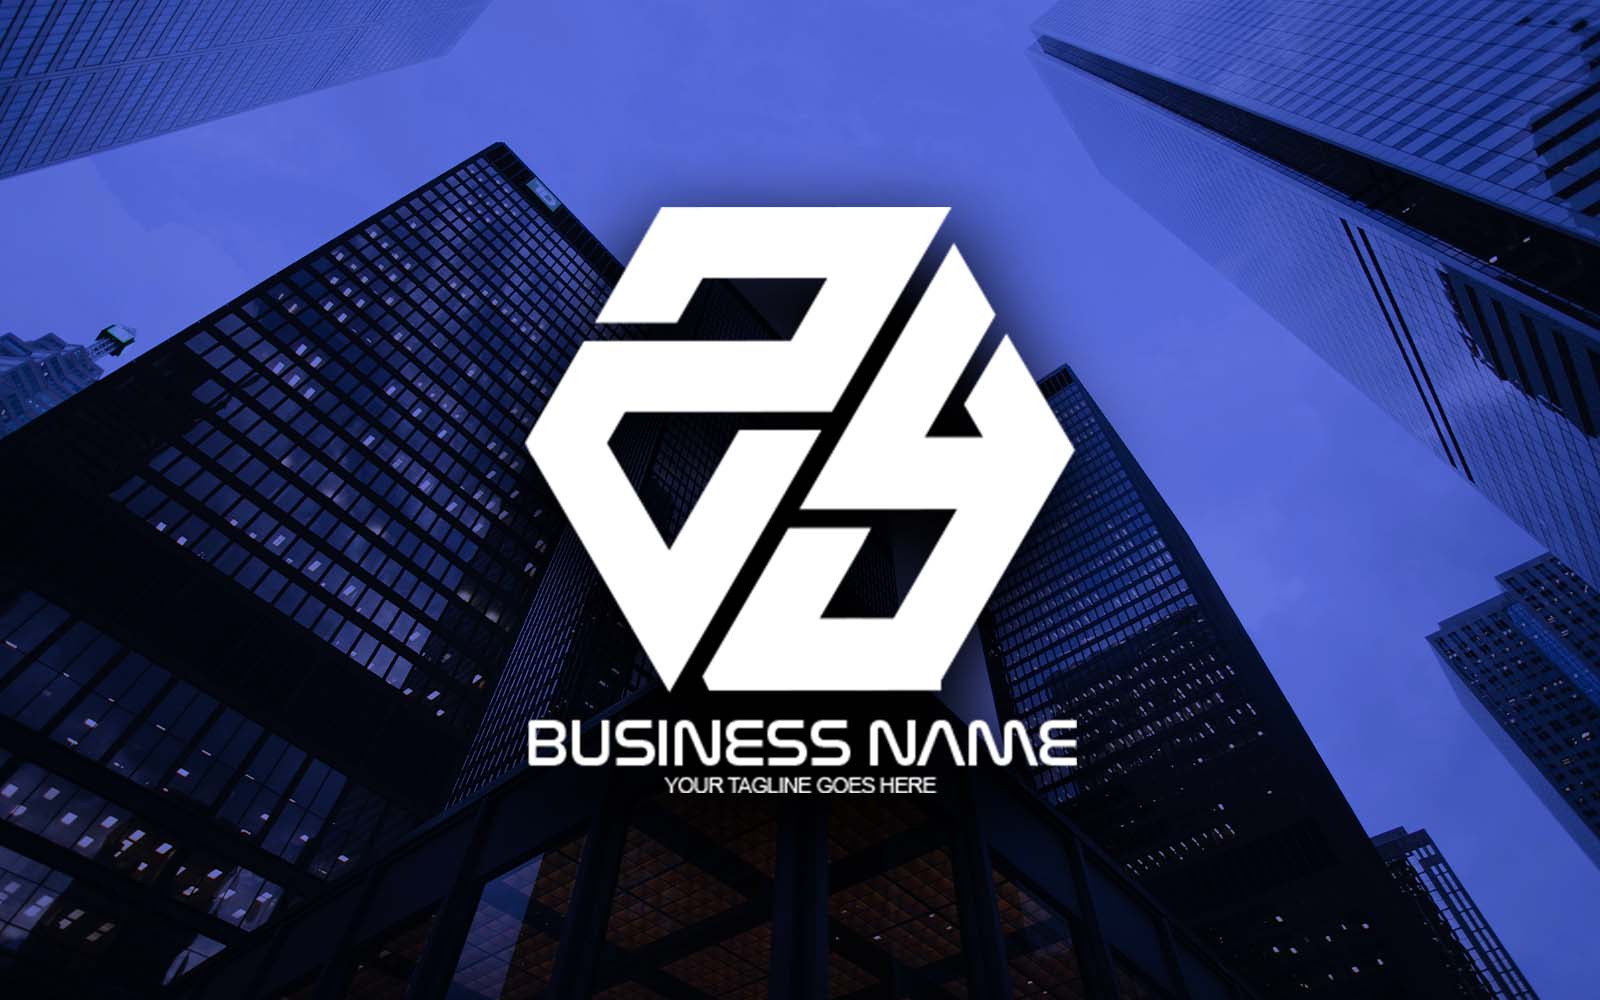 Professional Polygonal ZY Letter Logo Design For Your Business - Brand Identity